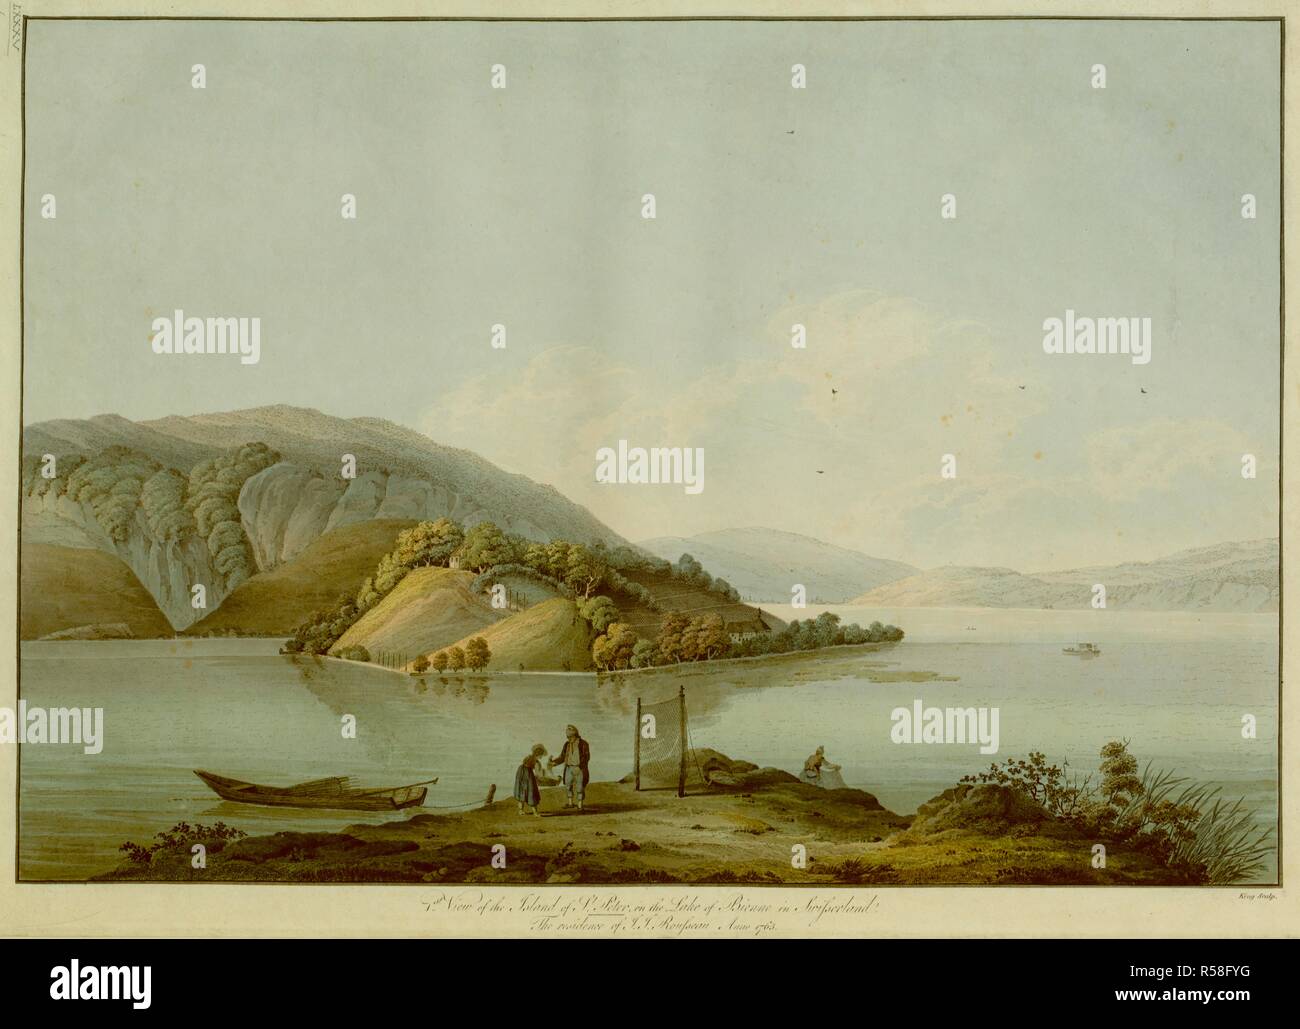 A woman collects fish from two fishermen checking their nets on the shore of Lake Biel in the foreground, with view of St. Peter's Island in the background. 1st View of the Island of St. Peter, on the Lake of Bienne in Swisserland : The residence of J. J. Rousseau Anno 1765. [London?] : [Thomas Gowland?], [about 1793]. Hand-coloured etching. Source: Maps K.Top.85.69.a. Language: English. Stock Photo